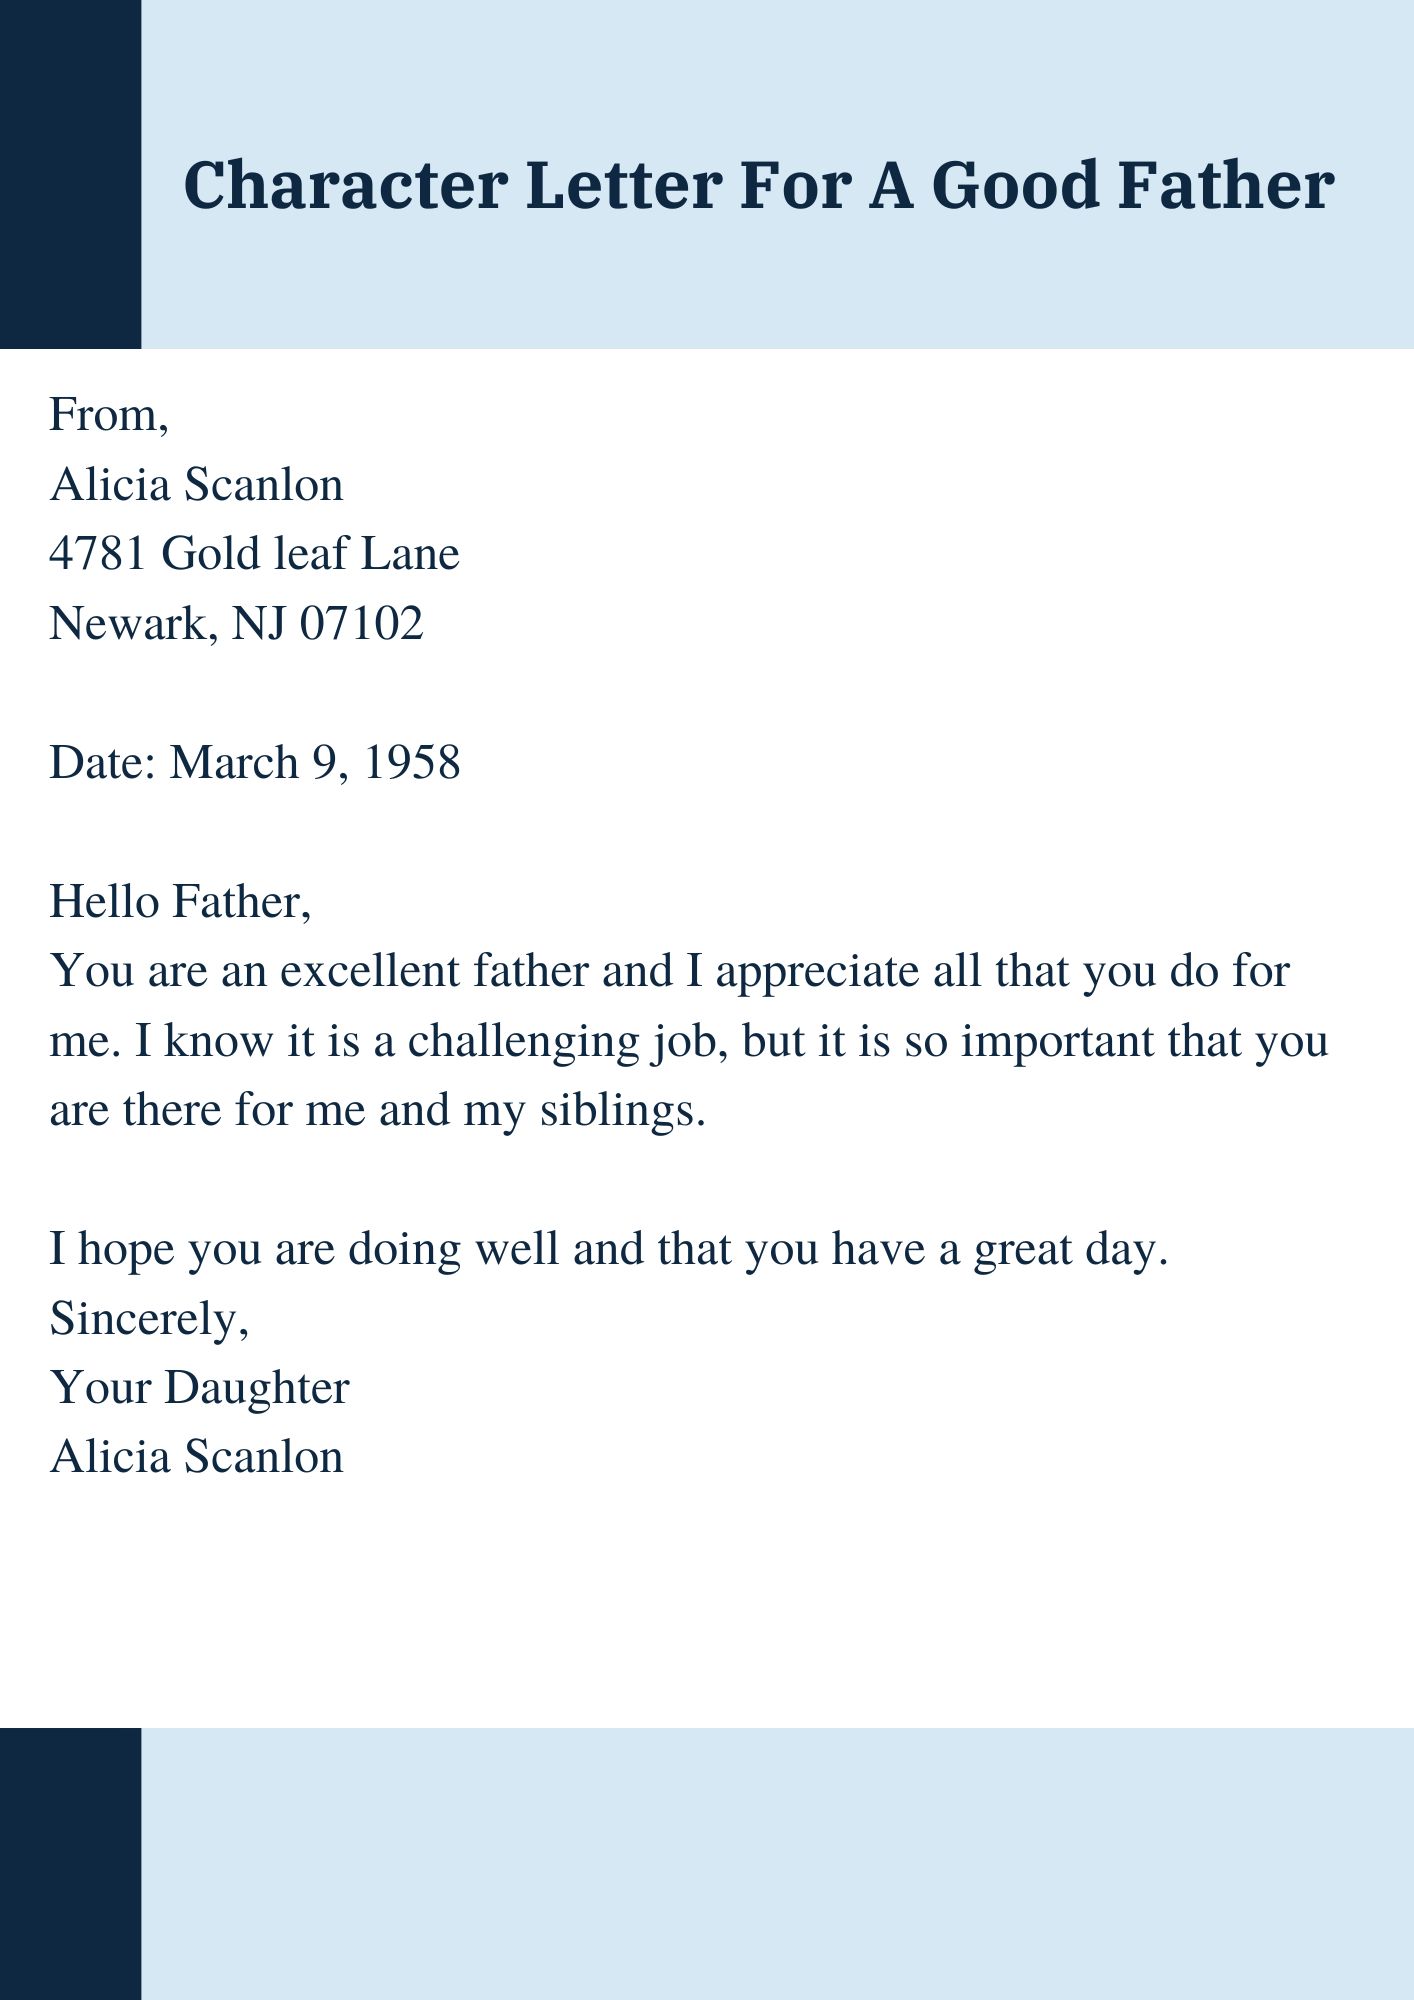 Character Letter for A Good Father Sample